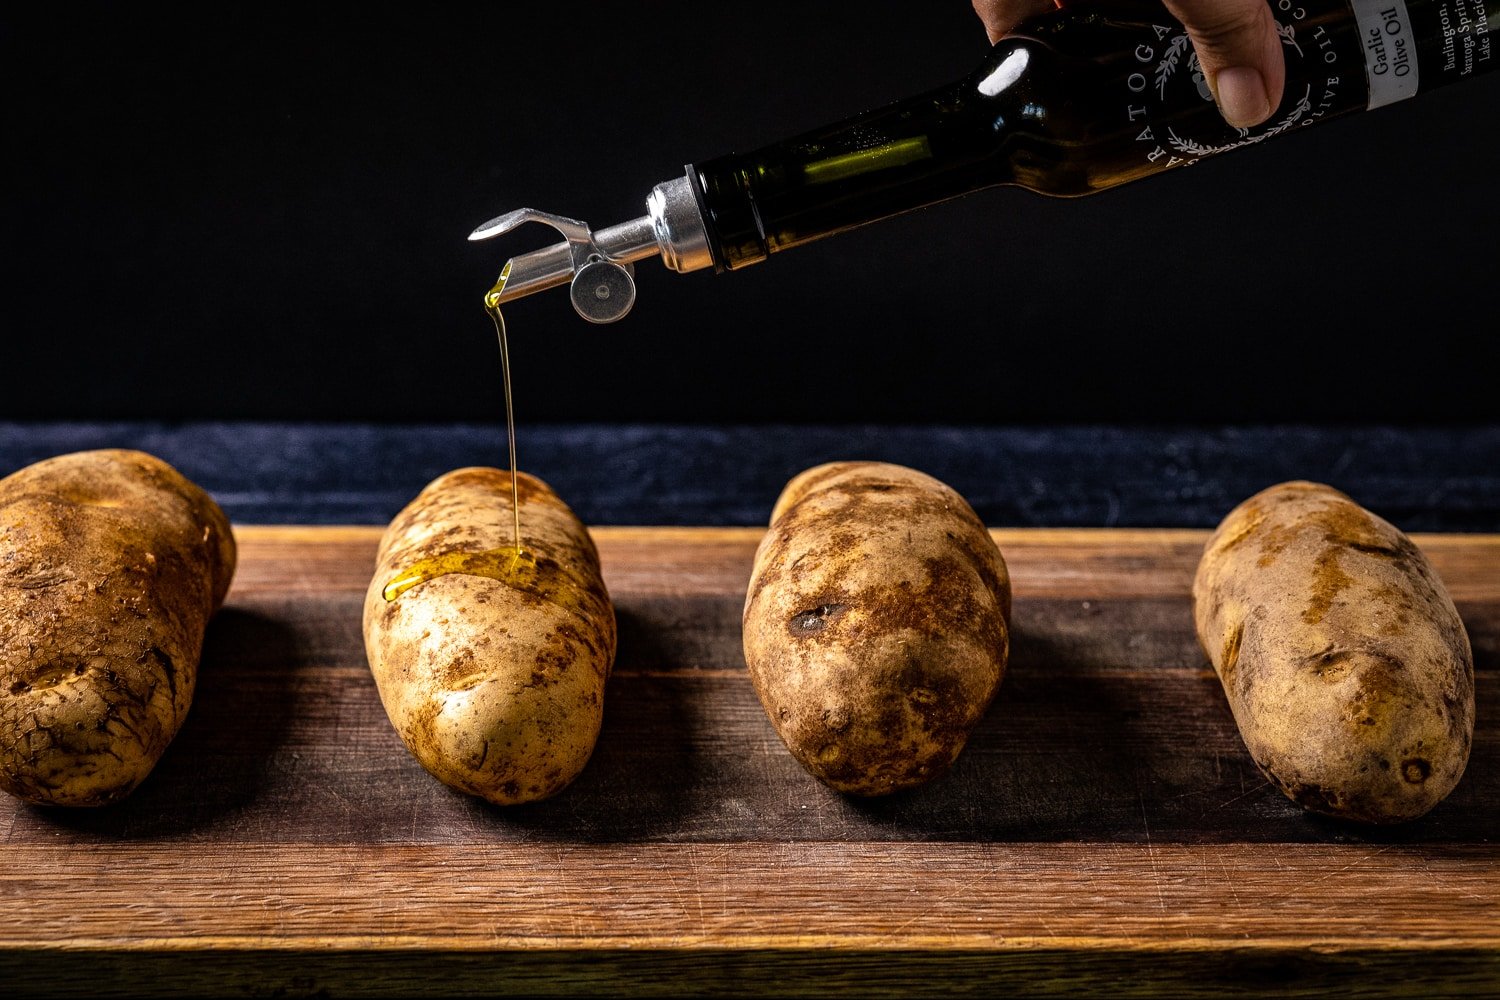 Four russet potatoes on a wooden cutting board being drizzled with olive oil.